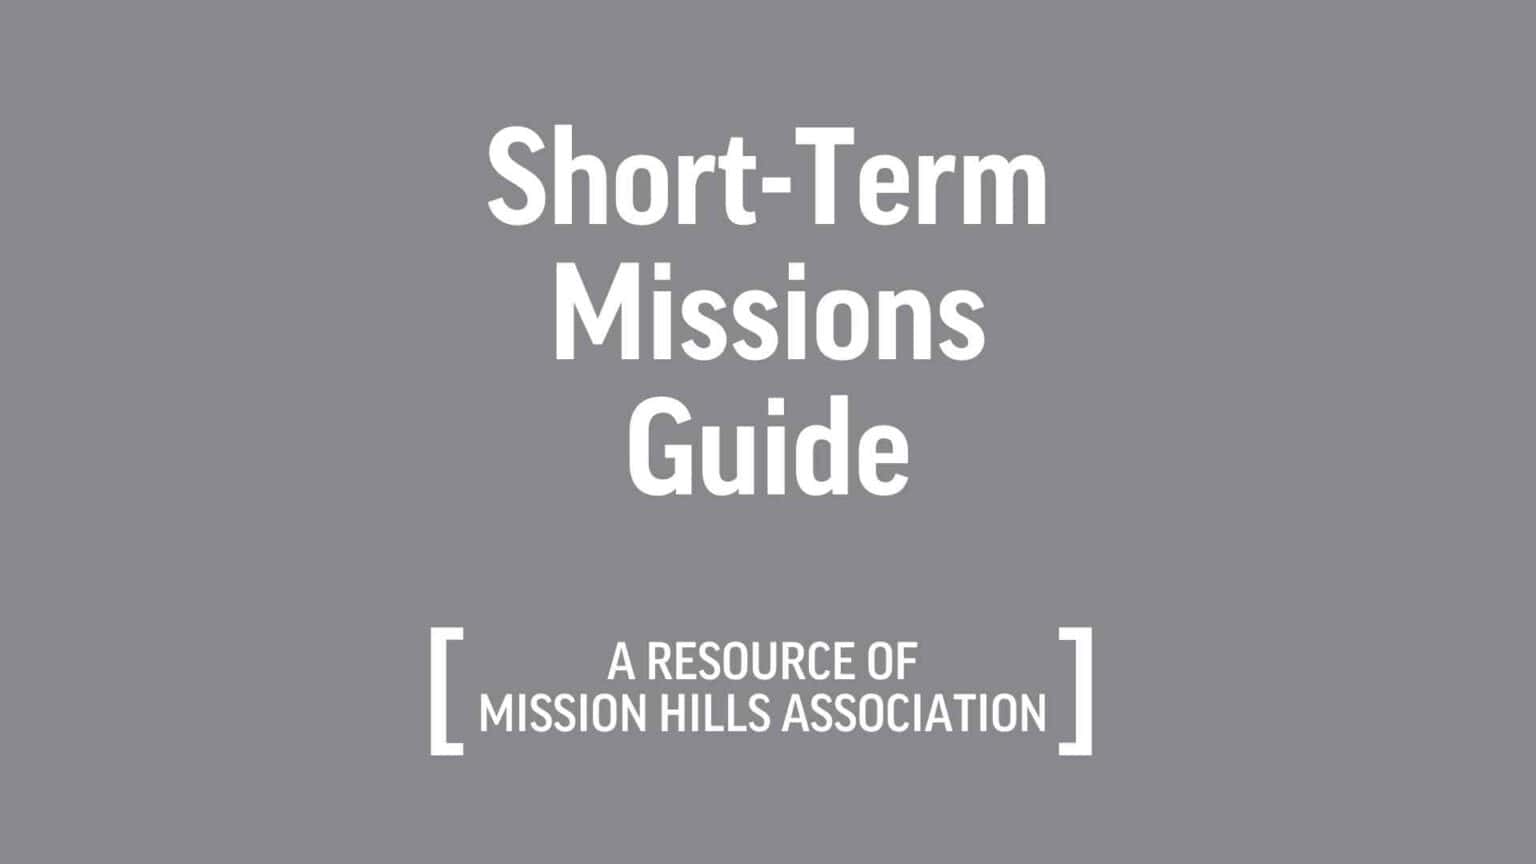 Short-Term Missions Guide